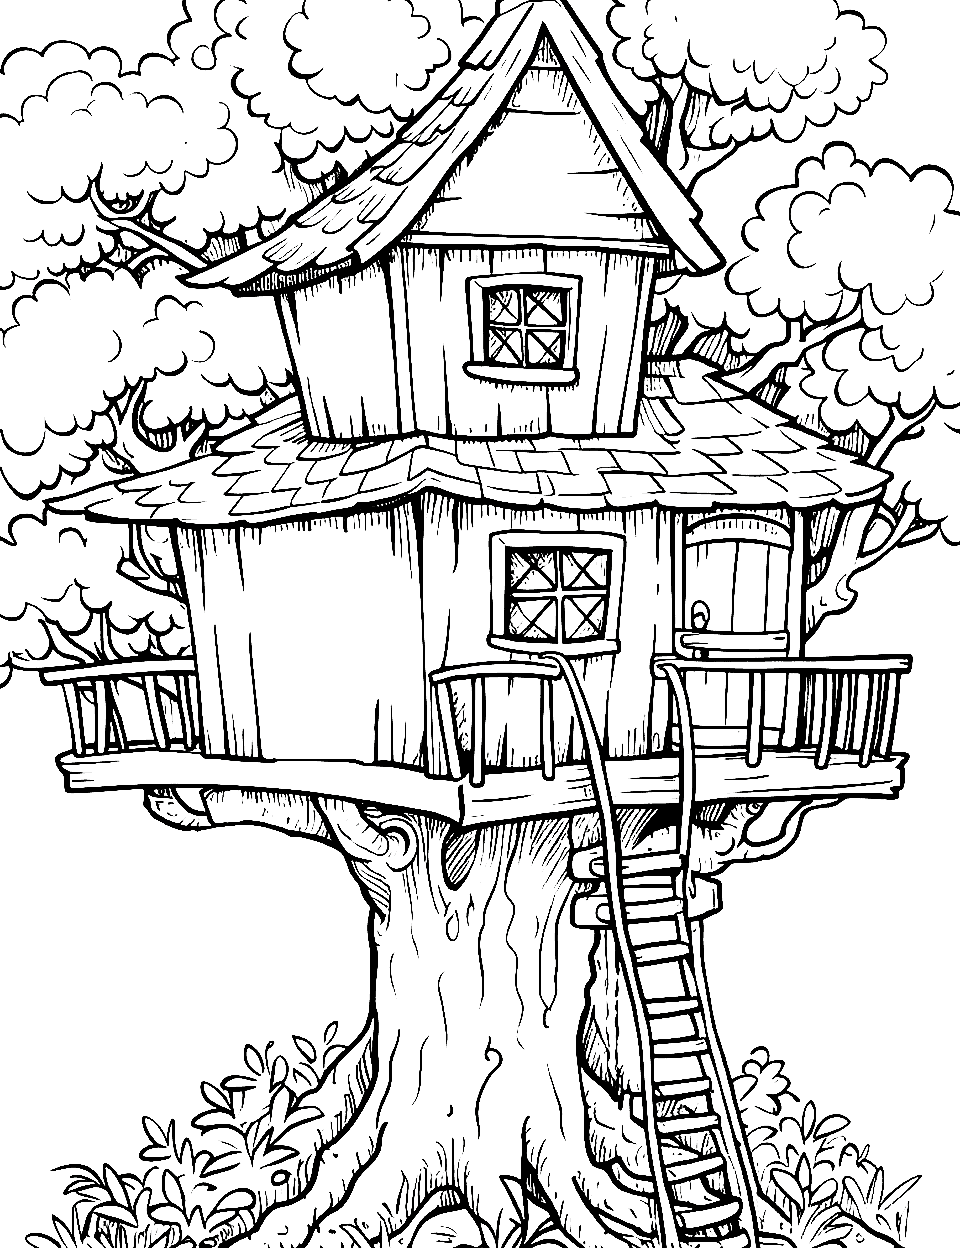 Jungle Tree House Coloring Page - A tree house in a jungle scene.